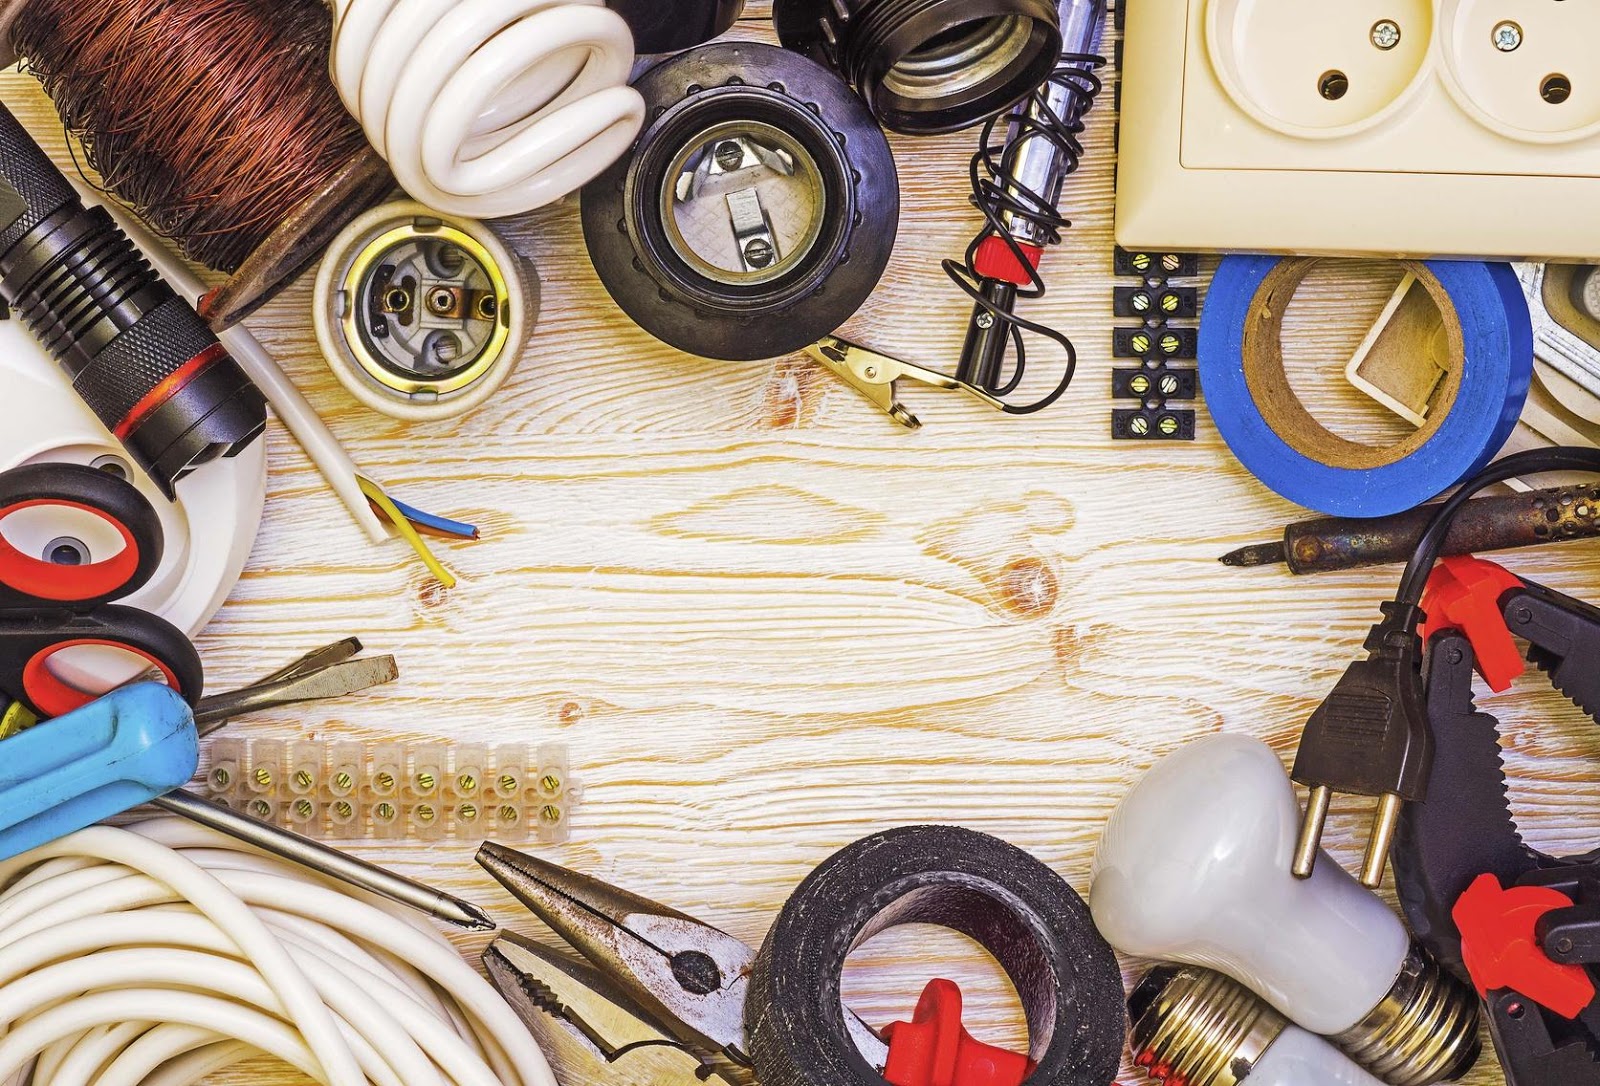 Finding Quality Used Electrical Supplies: Tips and Tricks